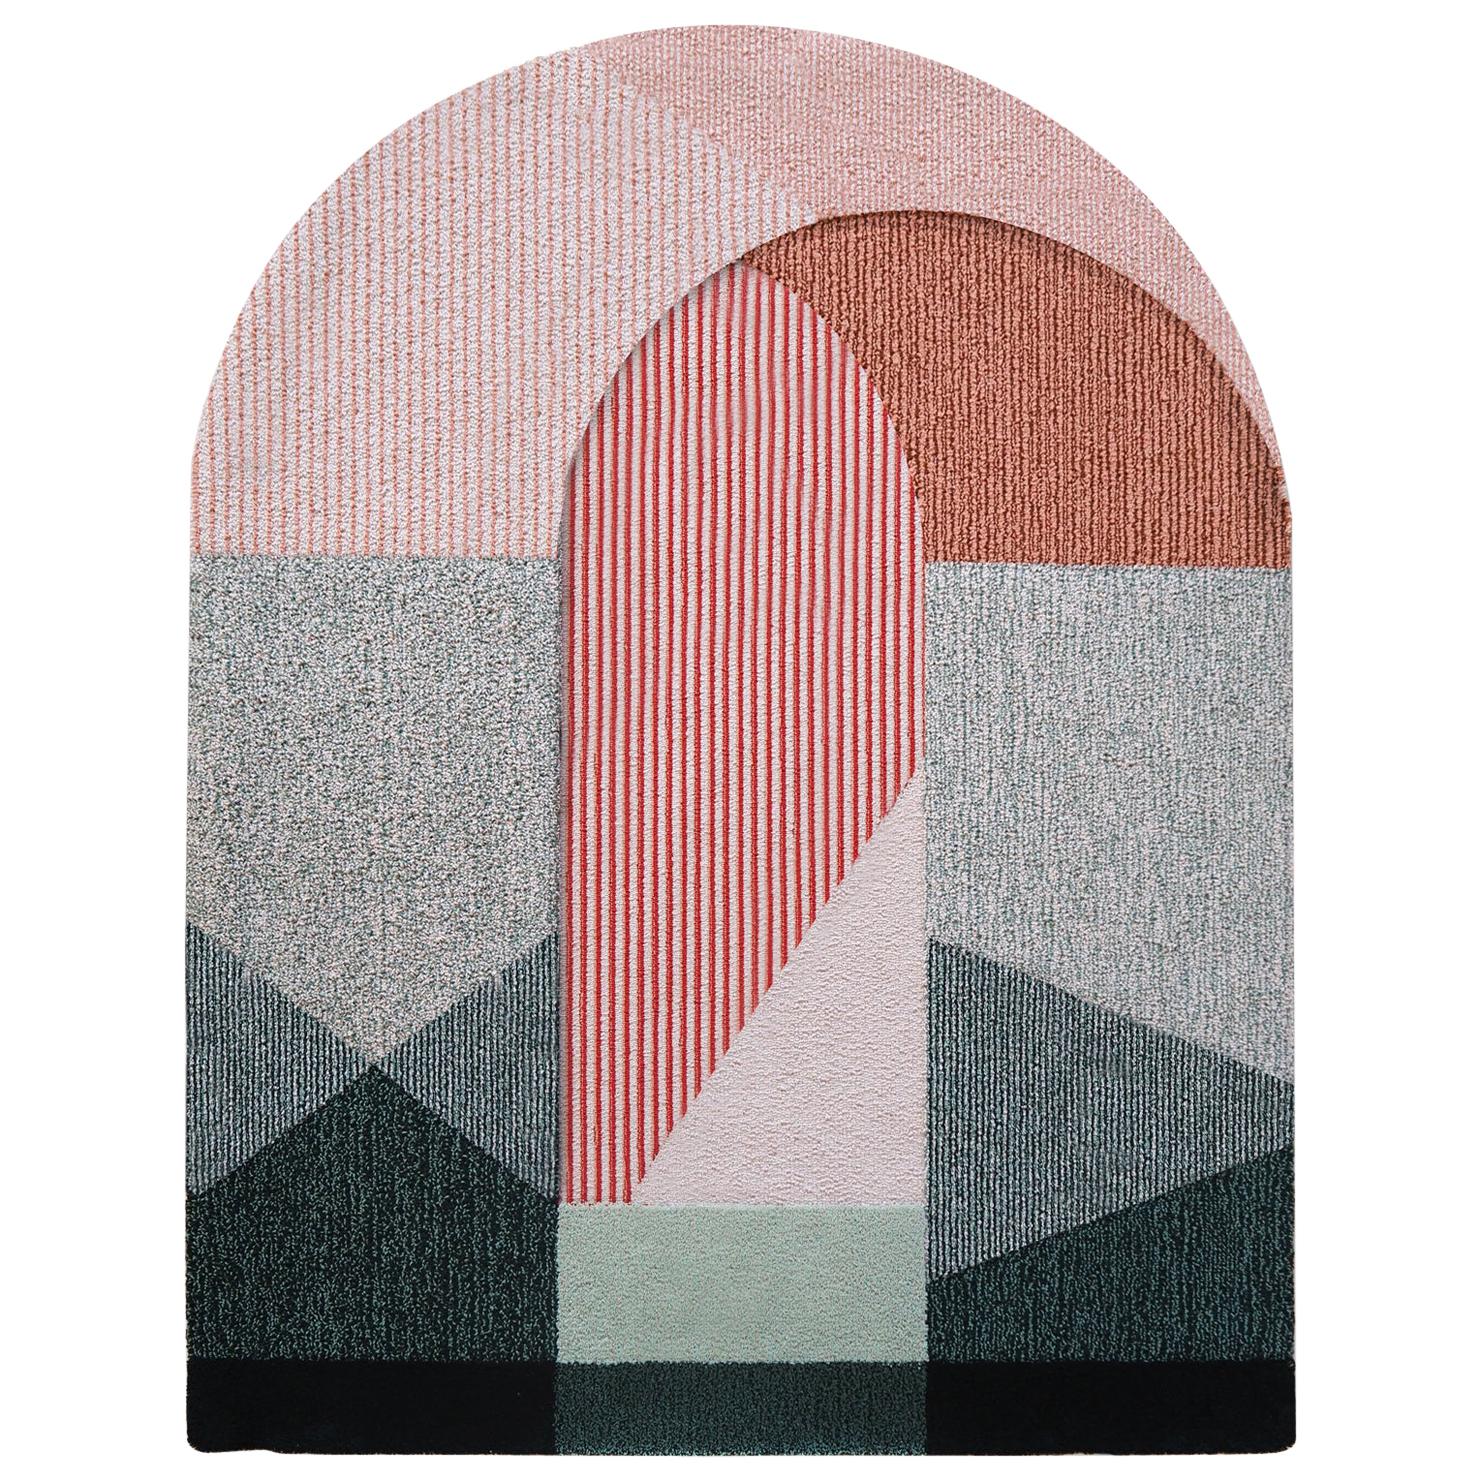 Sottoportico L Full Colors Rug 100% Wool by Portego